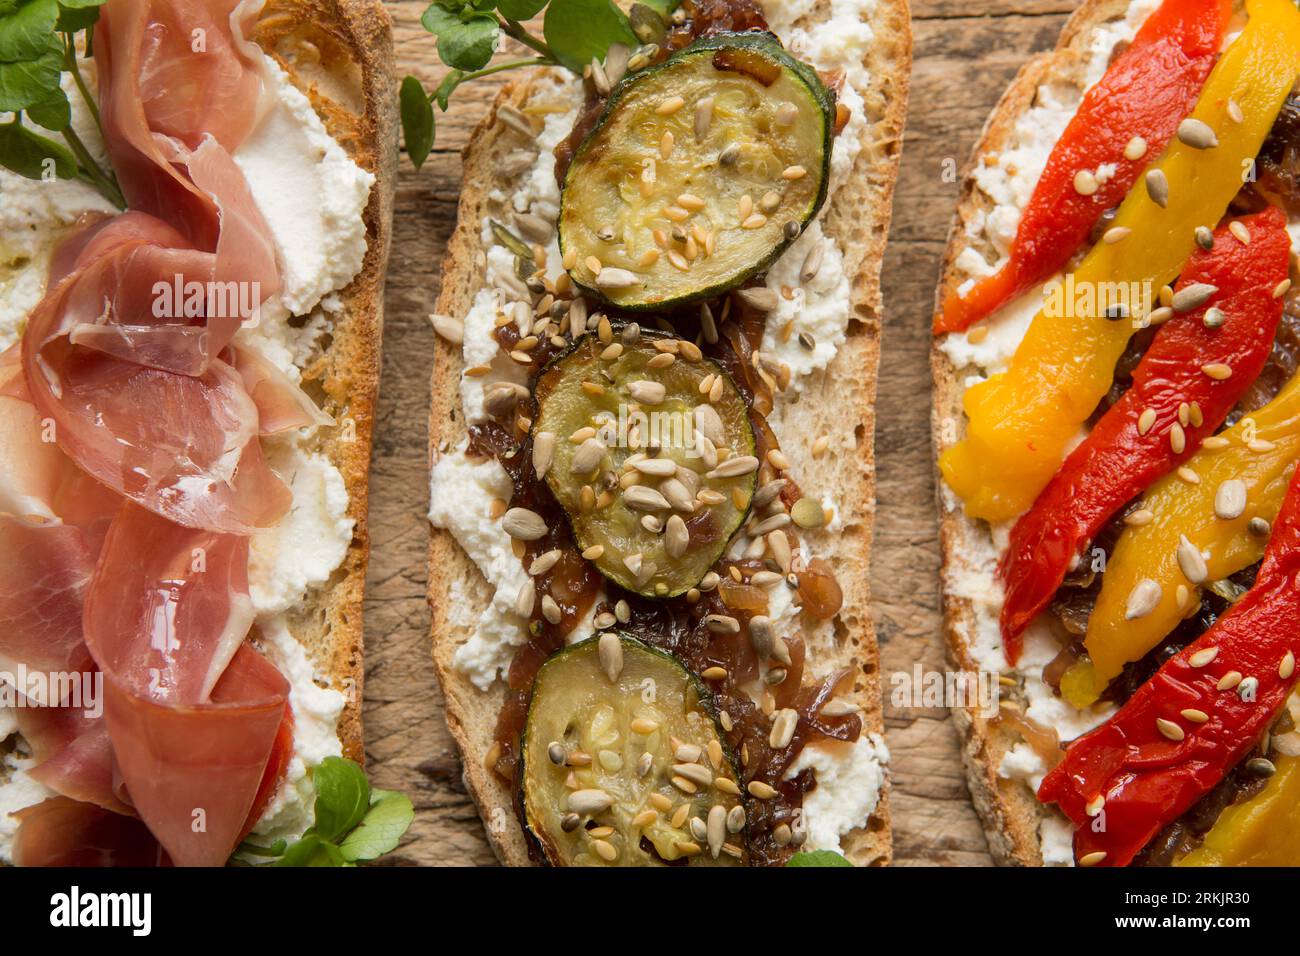 Three examples of bruschetta made with toasted sourdough bread spread with ricotta cheese. The toppings left-right are: Serrano ham drizzled with oliv Stock Photo